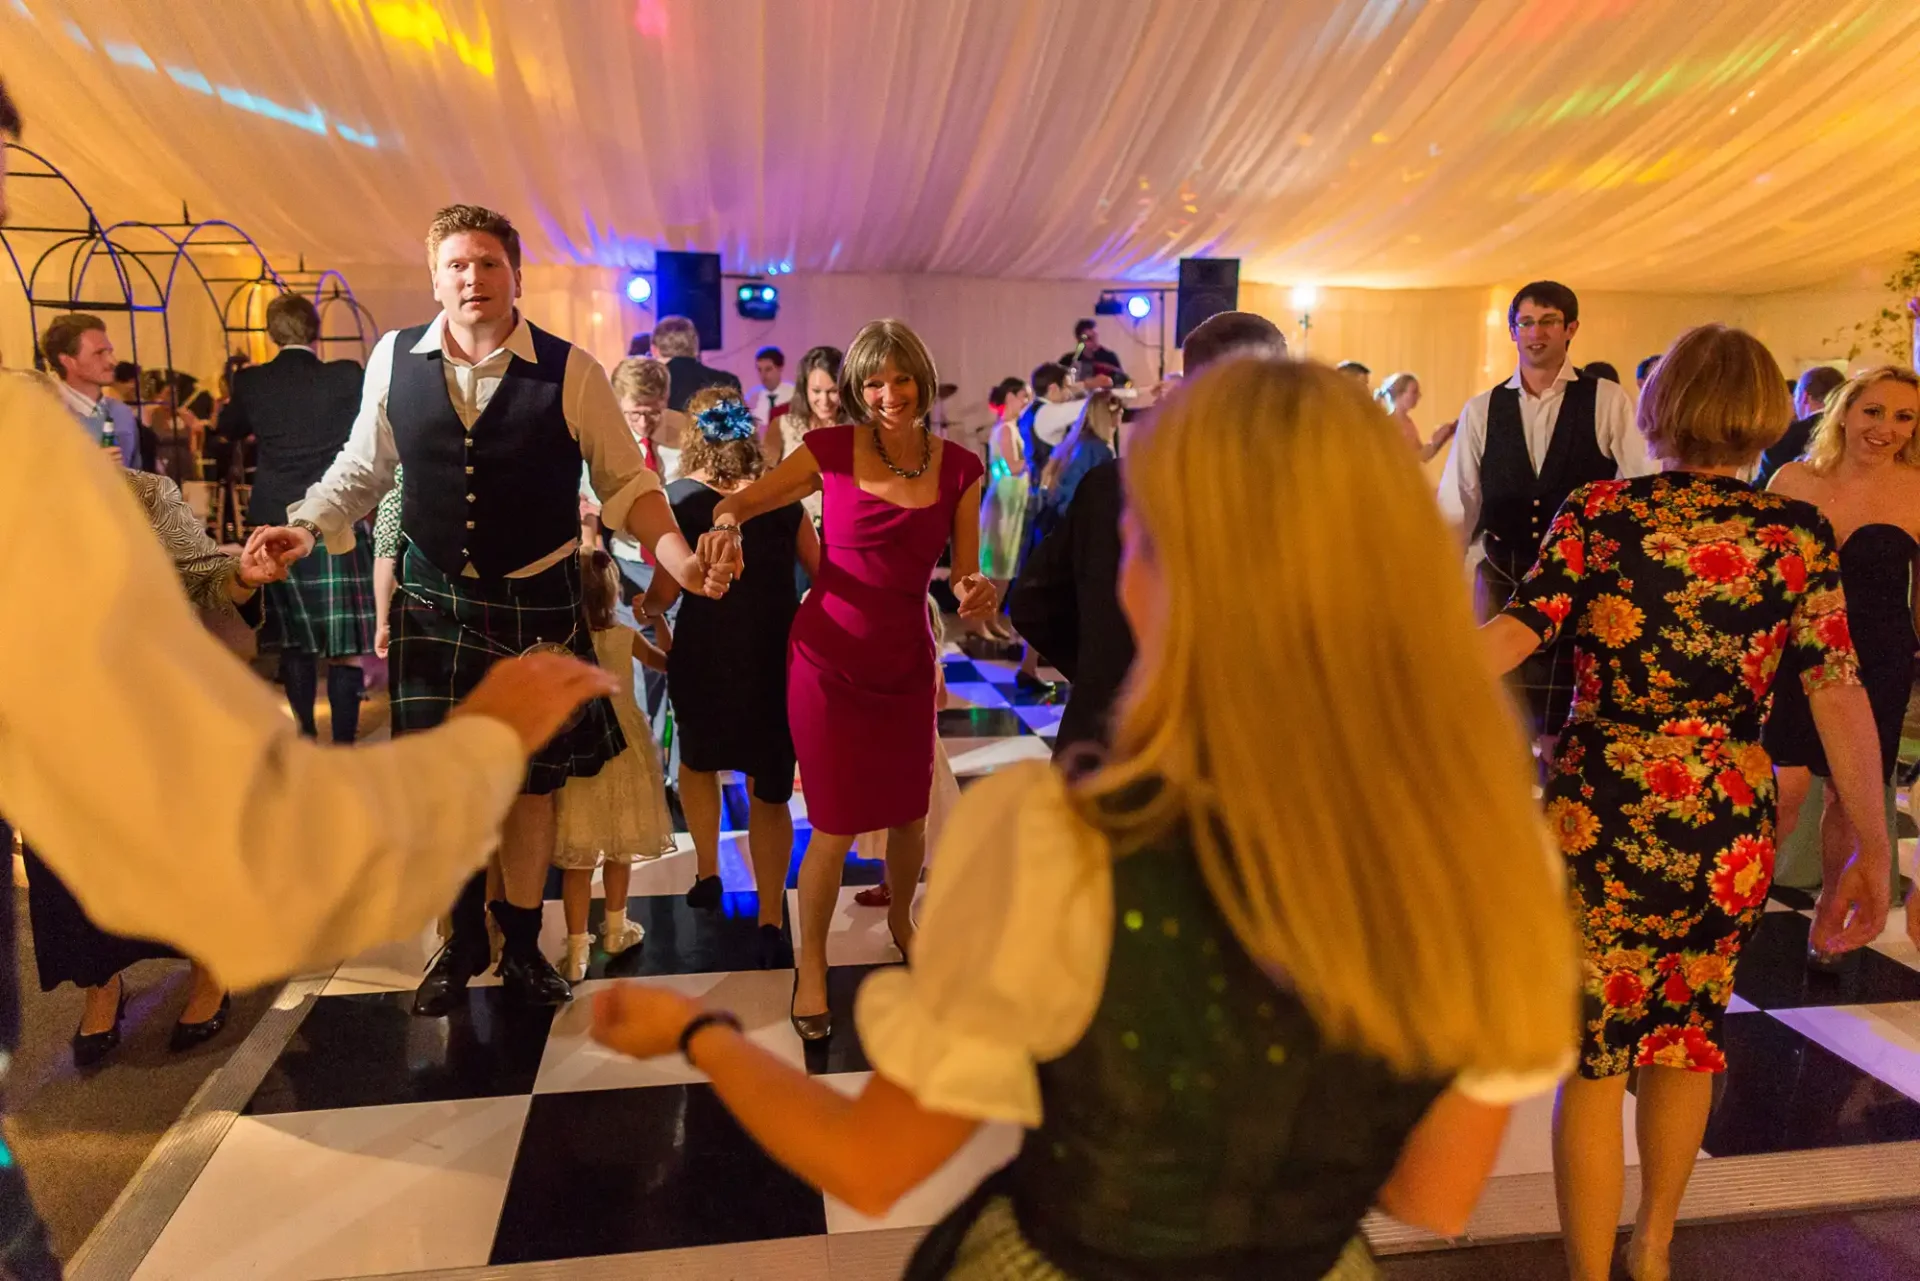 ceilidh dancing in the marquee in the evening